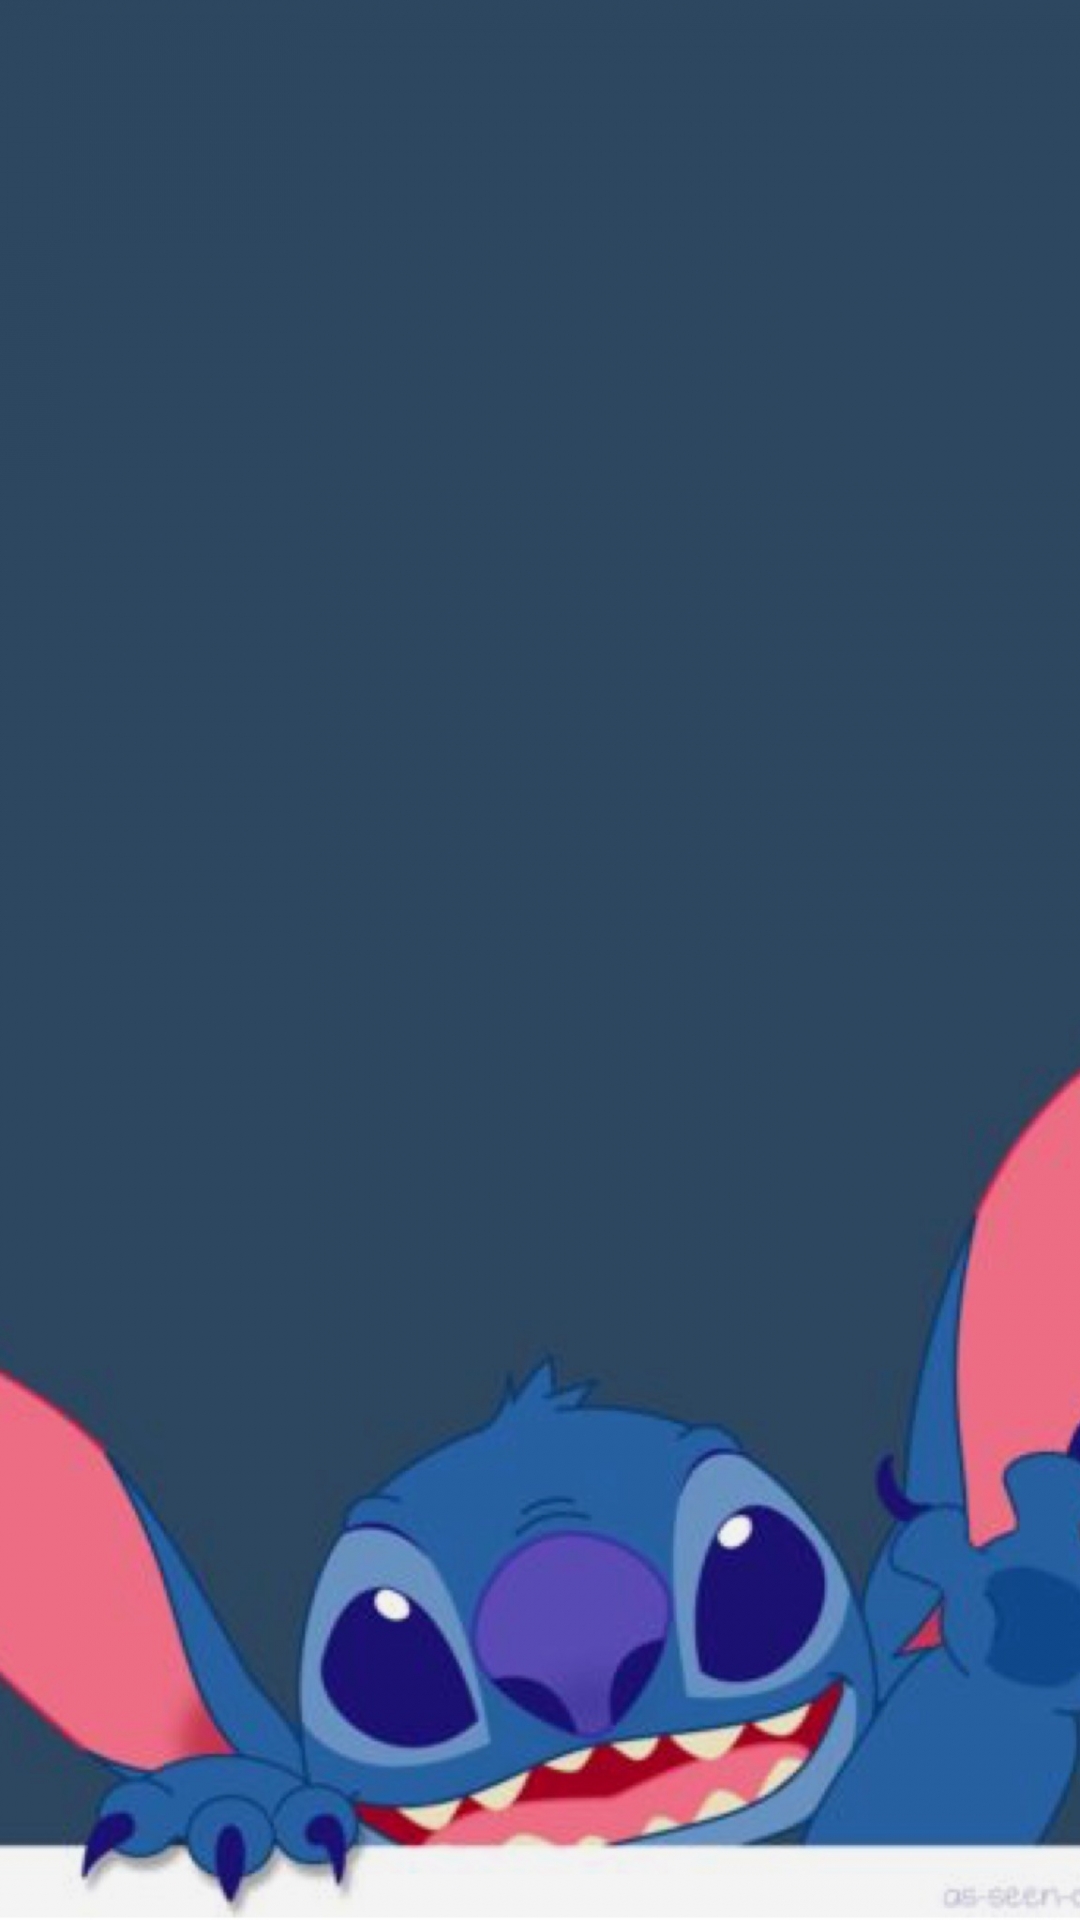 Lilo And Stitch Wallpapers 67 Images Lock Screen Stitch Wallpapers Iphone 2868185 Hd Wallpaper Backgrounds Download Choose your vaporwave background and stylish you phone. lock screen stitch wallpapers iphone